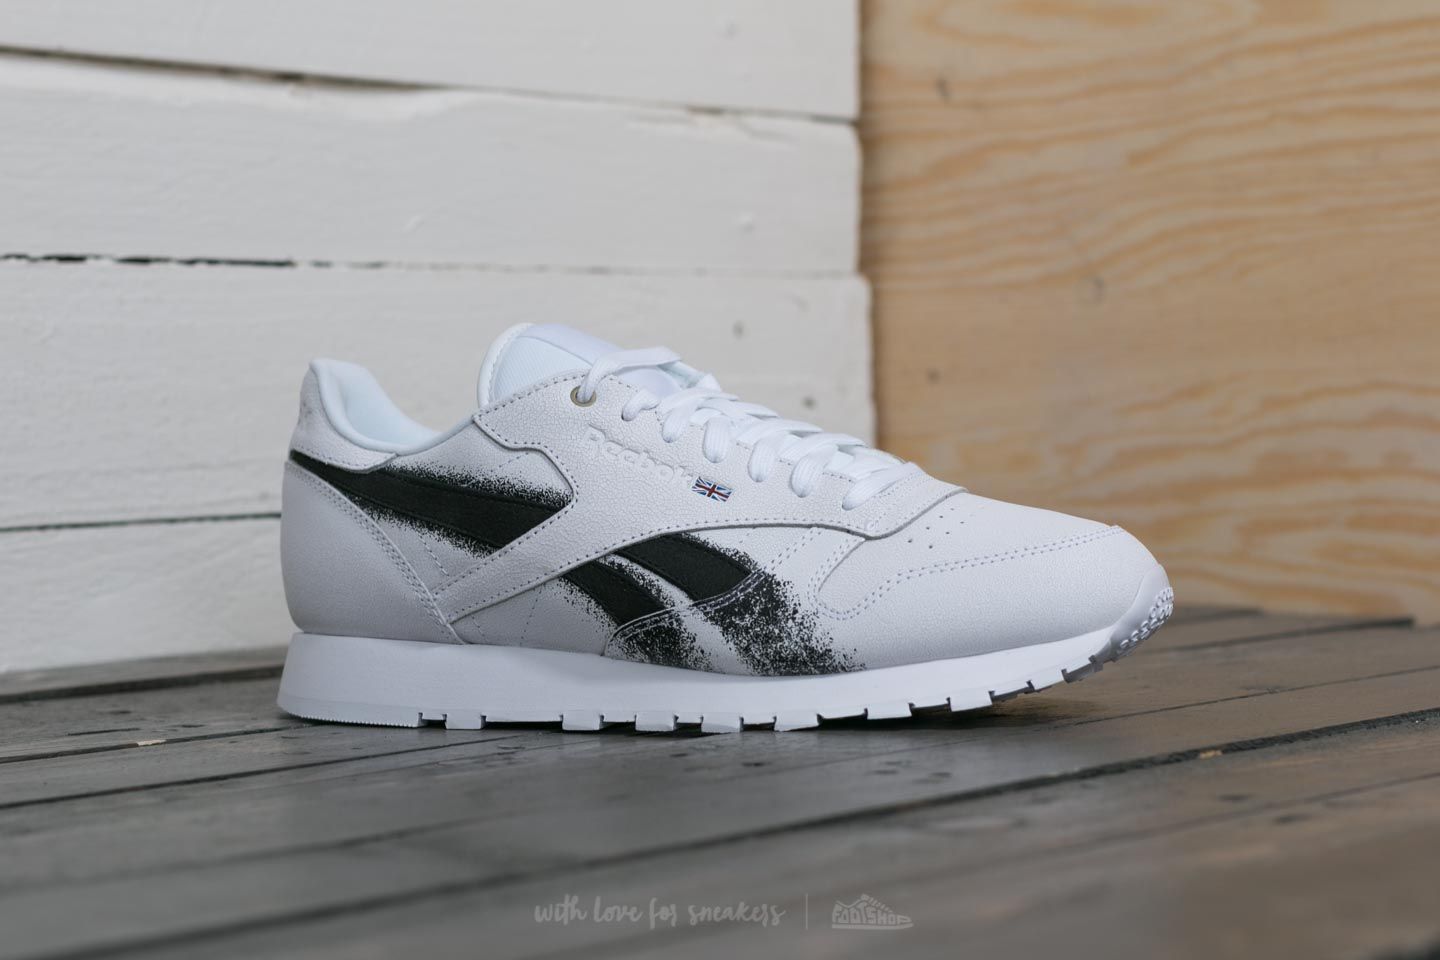 Montana Cans x Reebok Classic Leather Pack